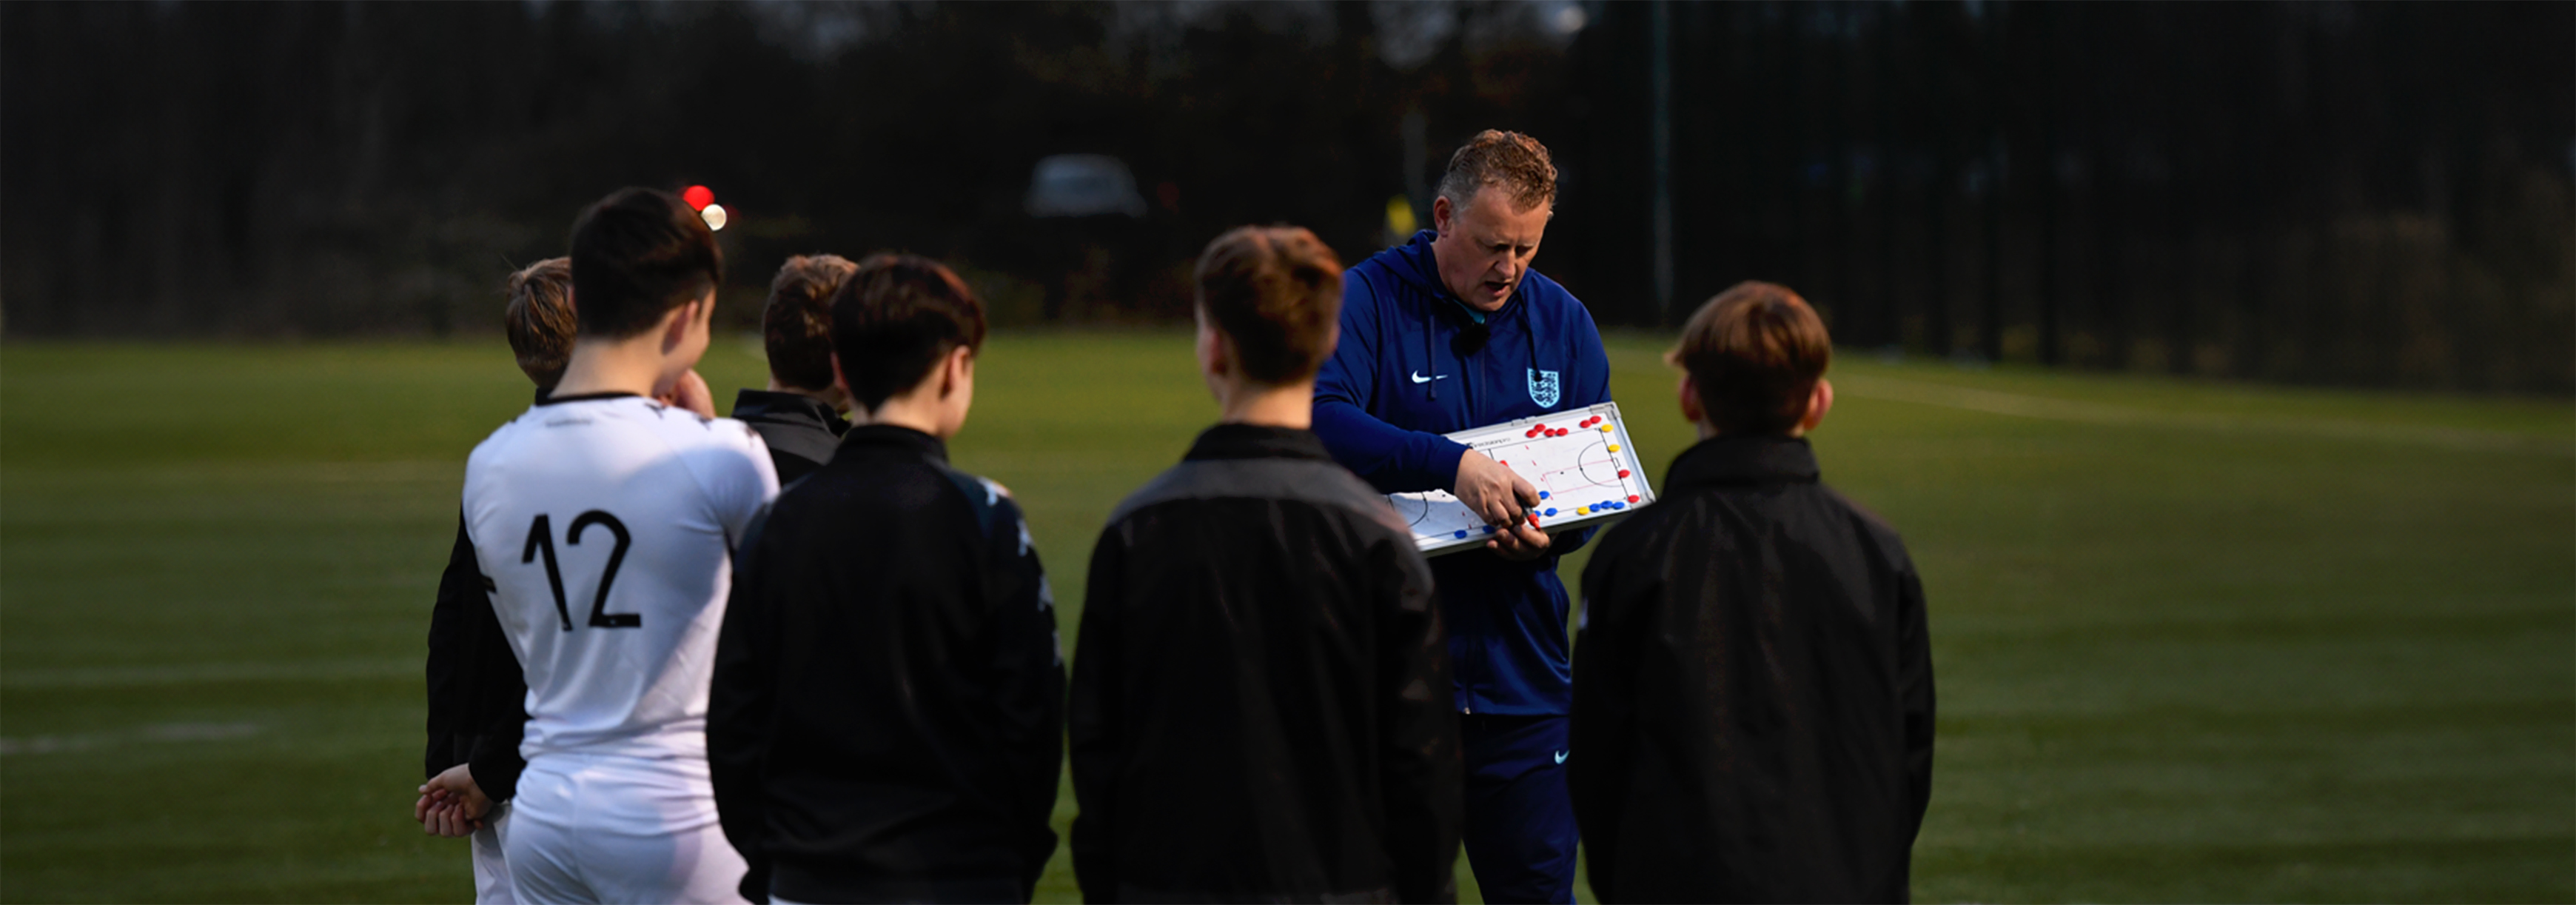 A small group of players gather around a coach who's holding a tactics board.